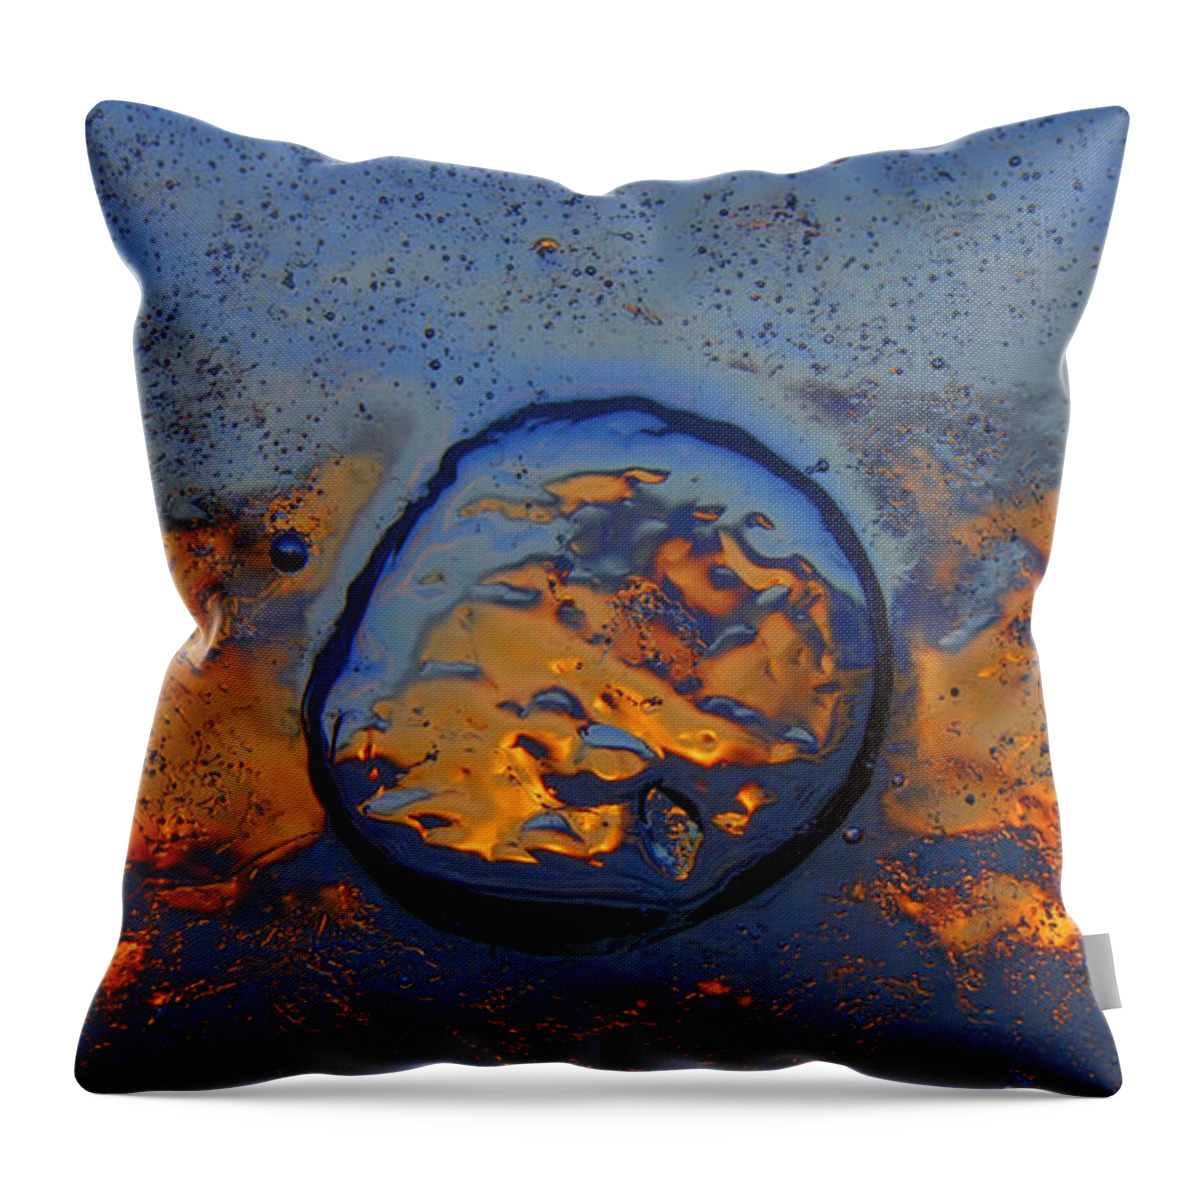 Sunset Throw Pillow featuring the photograph Sunset Rings by Sami Tiainen